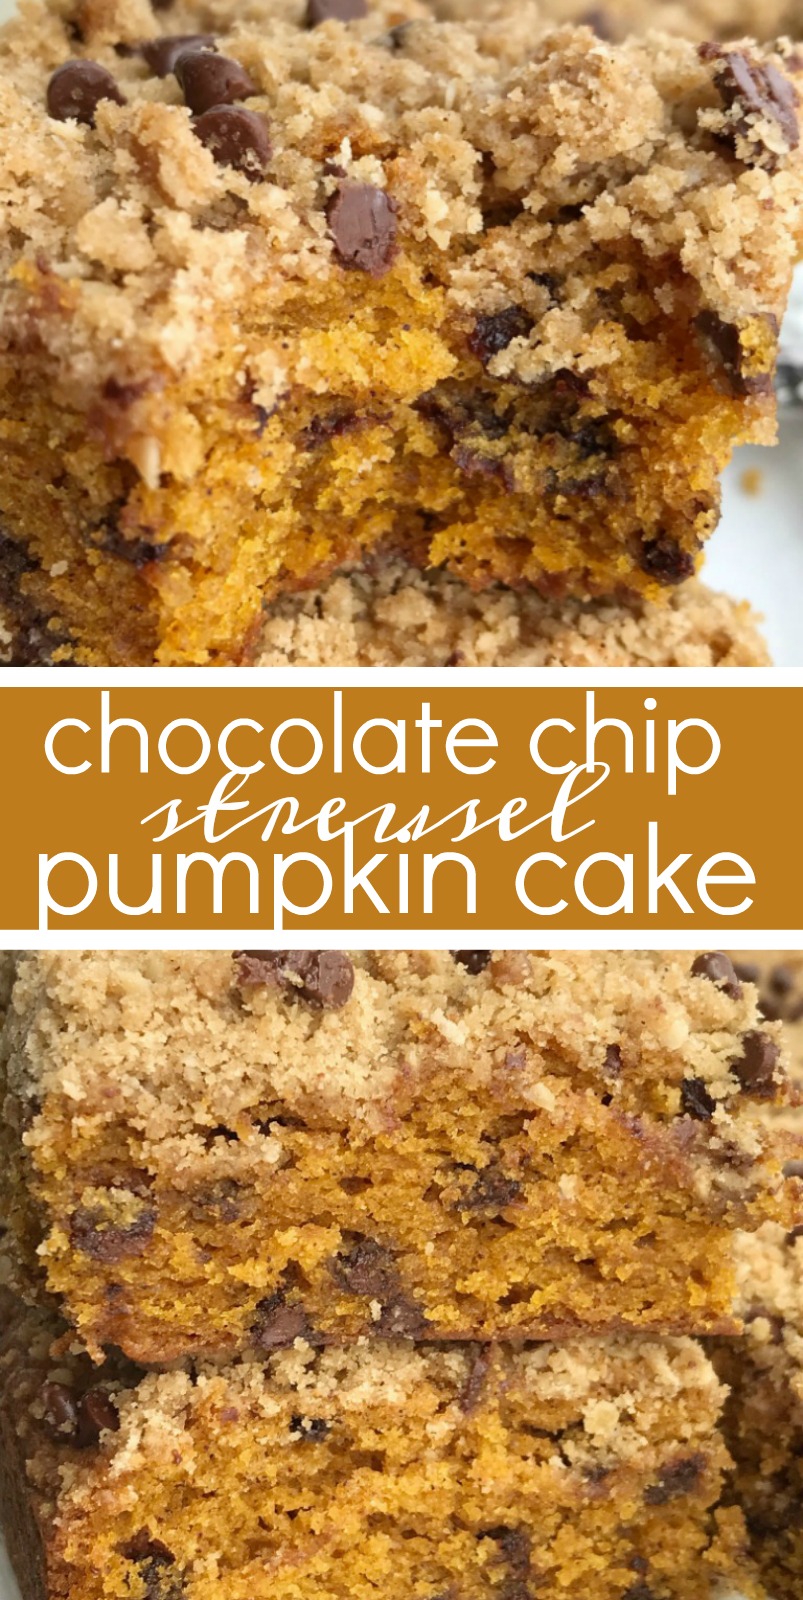 Chocolate Chip Streusel Pumpkin Cake | Chocolate Chip Pumpkin Cake | Pumpkin Recipes | The best pumpkin cake studded with chocolate chips and topped with a crumbly, sweet streusel topping. This chocolate chip streusel pumpkin cake is a fun twist to traditional pumpkin cake and oh so good! #pumpkinrecipes #pumpkin #cake #fallbaking #recipeoftheday #pumpkincake